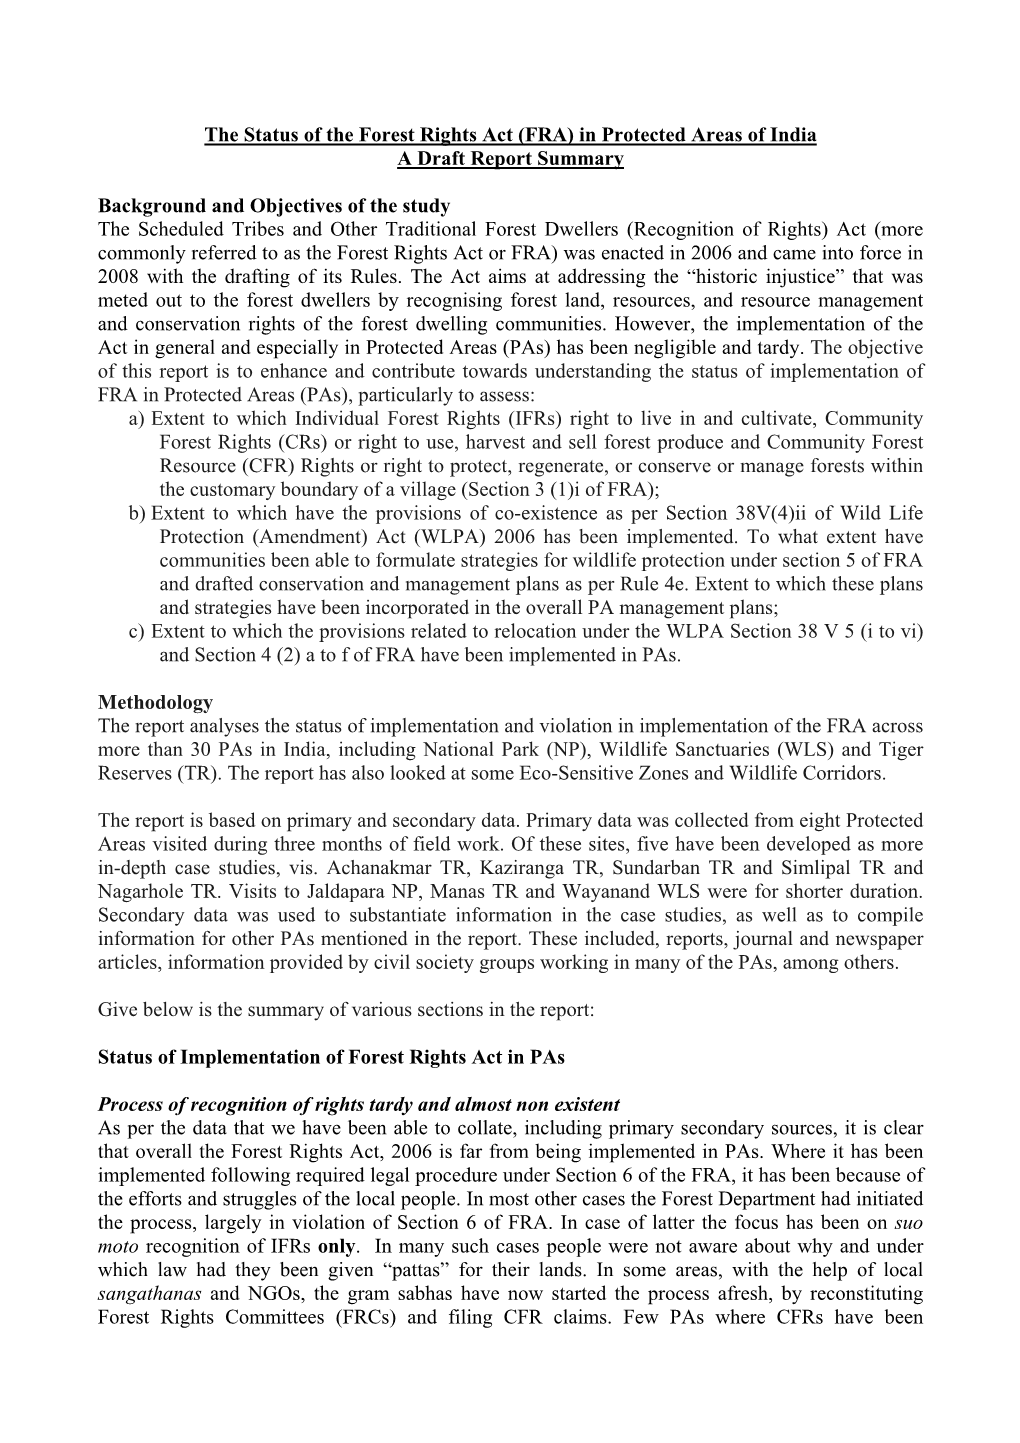 The Status of the Forest Rights Act (FRA) in Protected Areas of India a Draft Report Summary